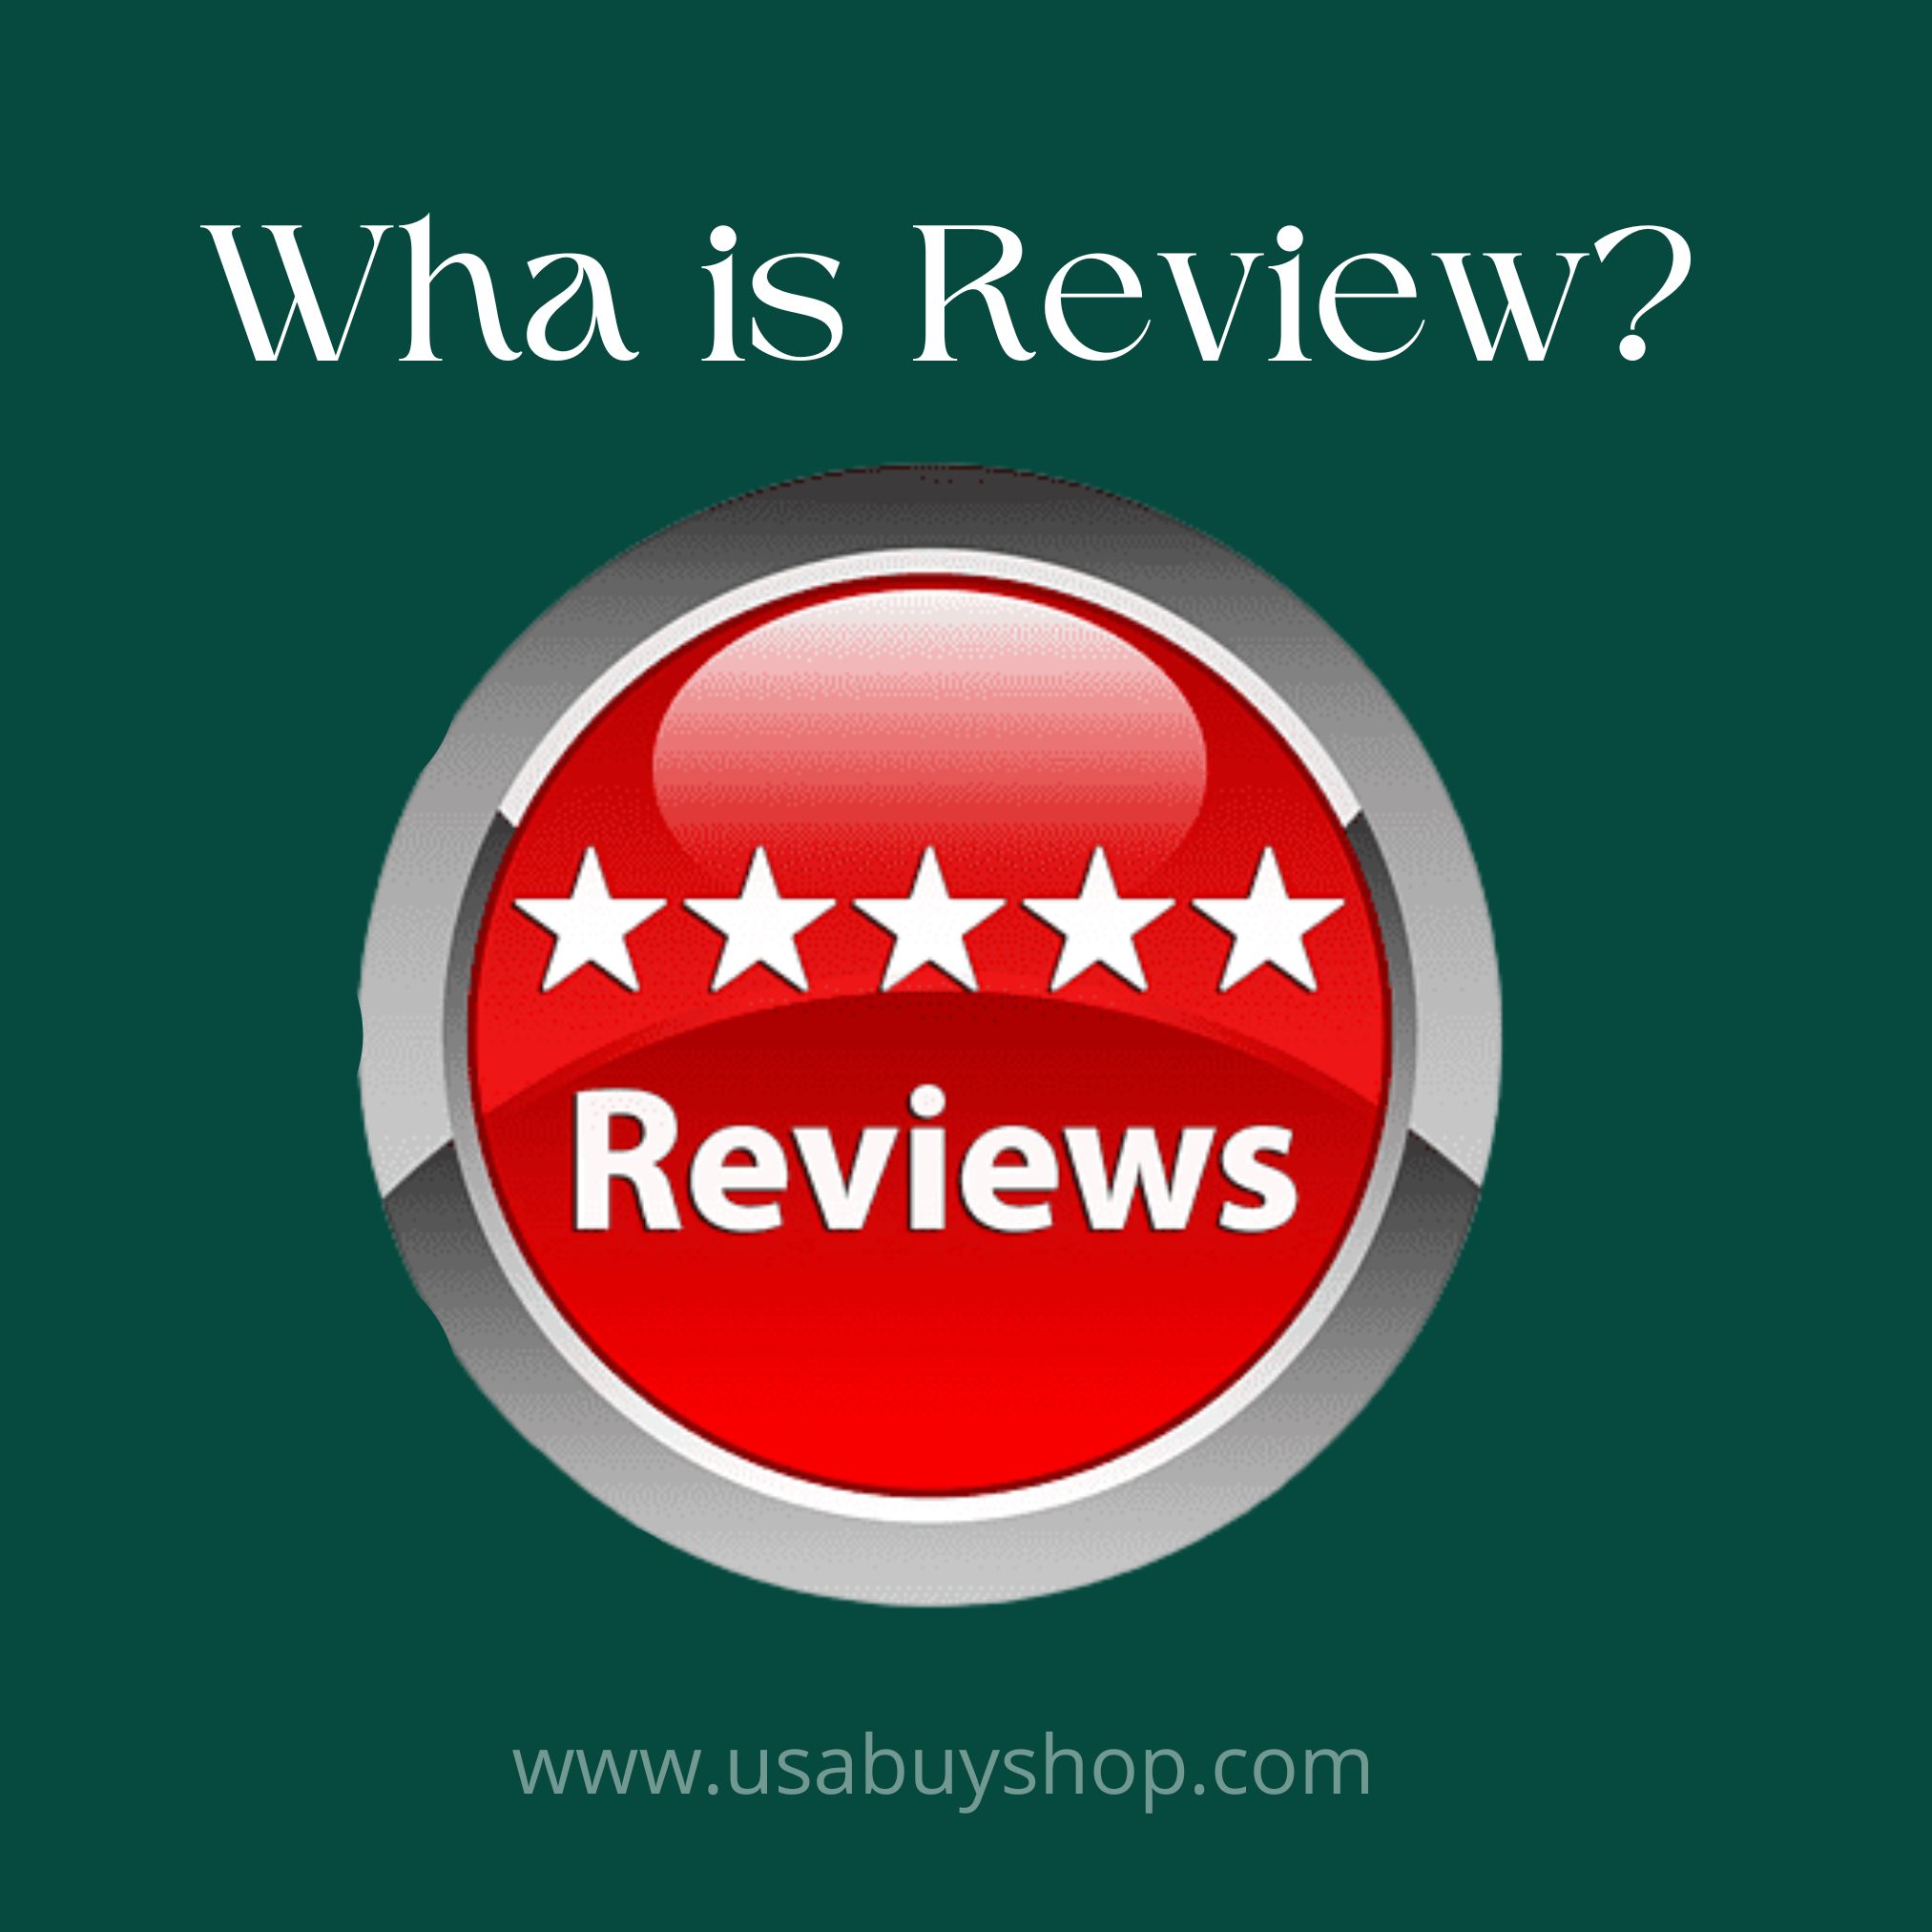 What is Review